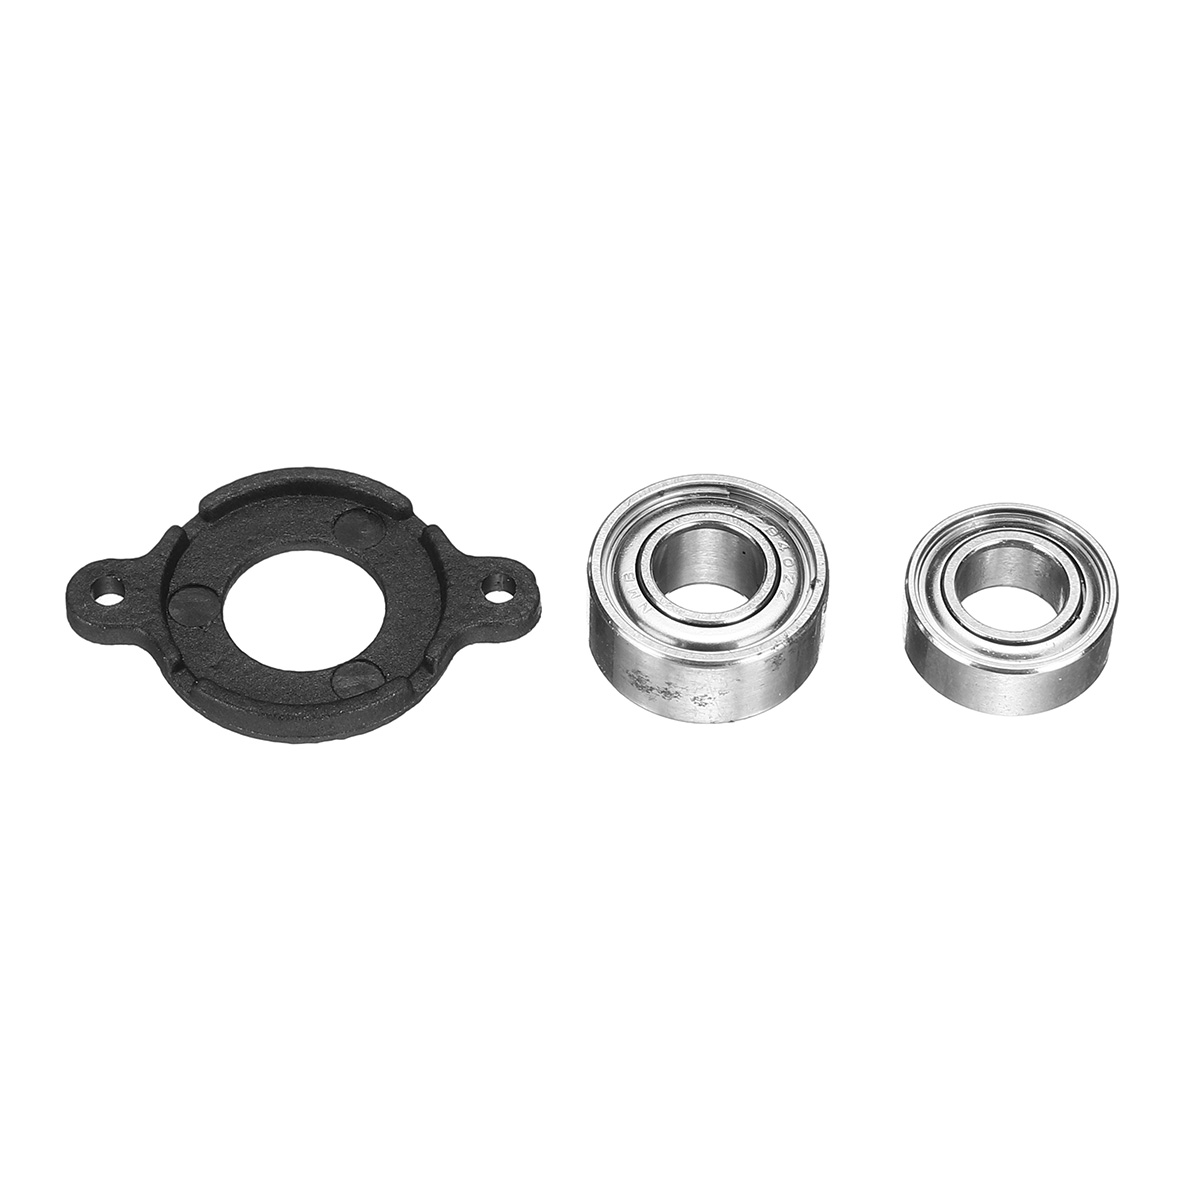 YXZNRC F09-S Eachine E200 Ball Bearing RC Helicopter Parts